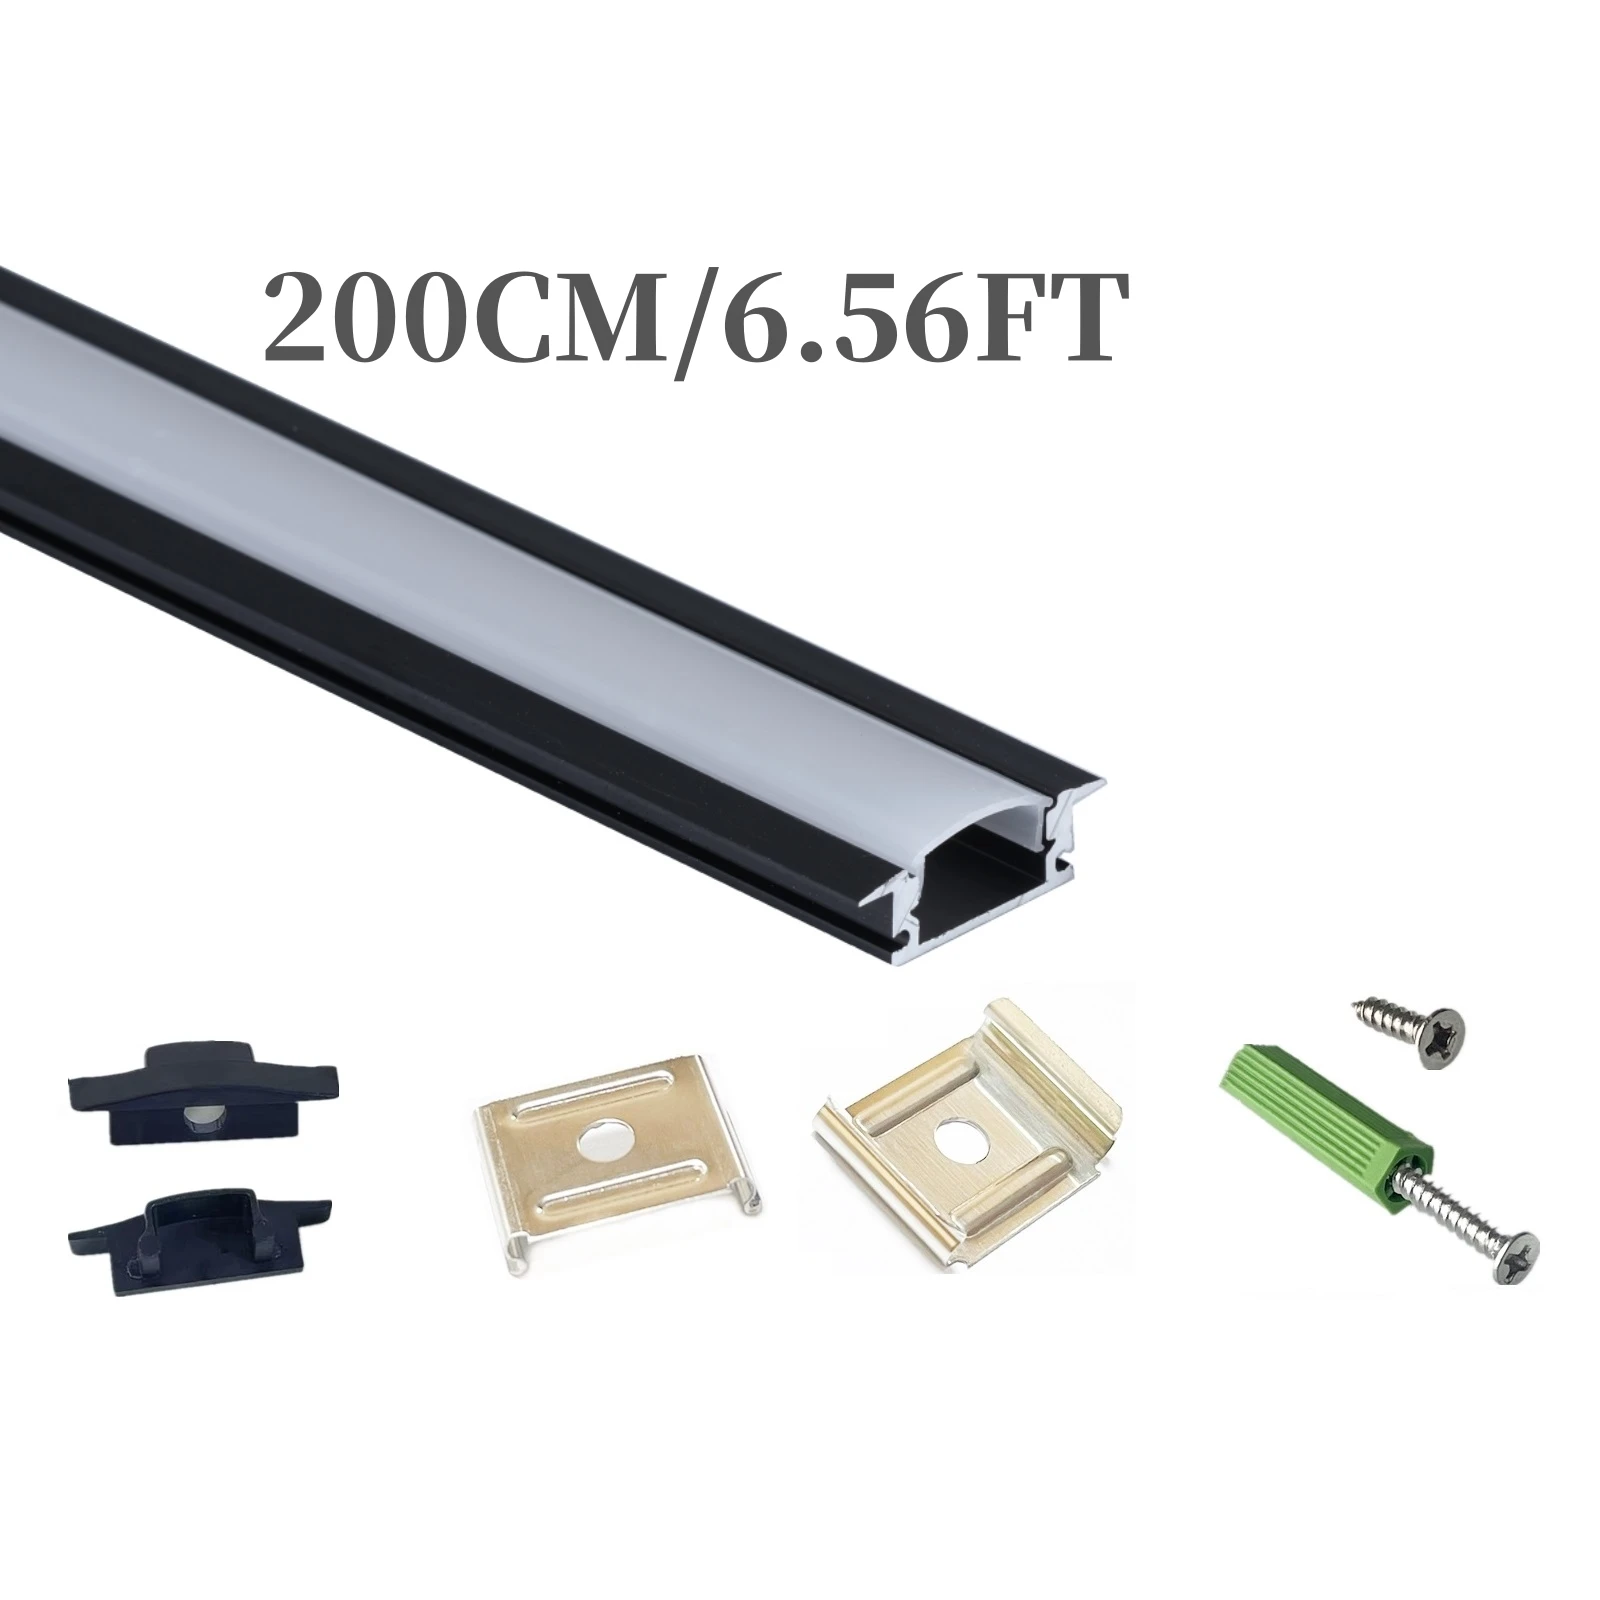 

10-30 Pack 80Inch 2m Led Strip Black Alu Channel Diffuser,5-12mm Wide Tape Recessed Track Milky Cover Cabinet Built In Profile